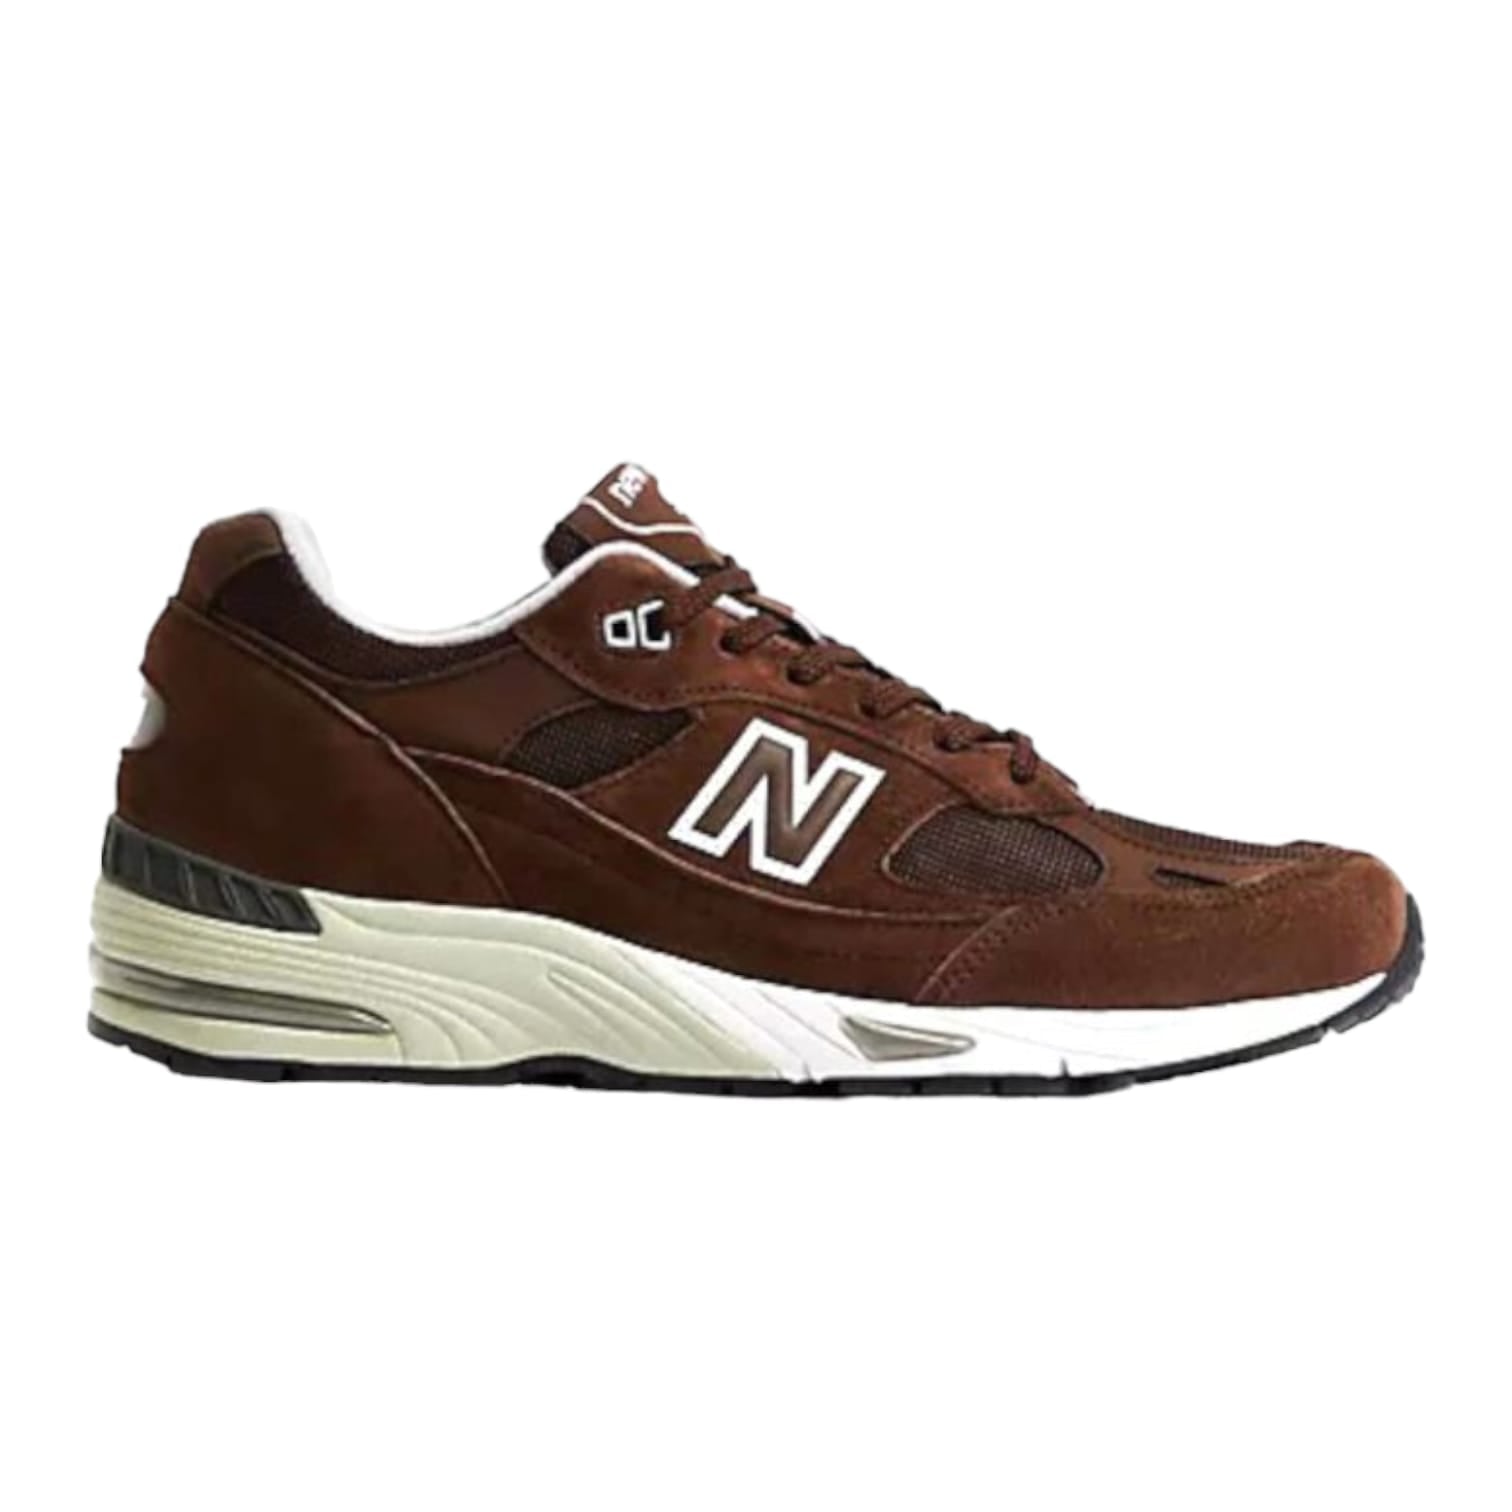 New Balance MADE in UK 991v1 Sneakers